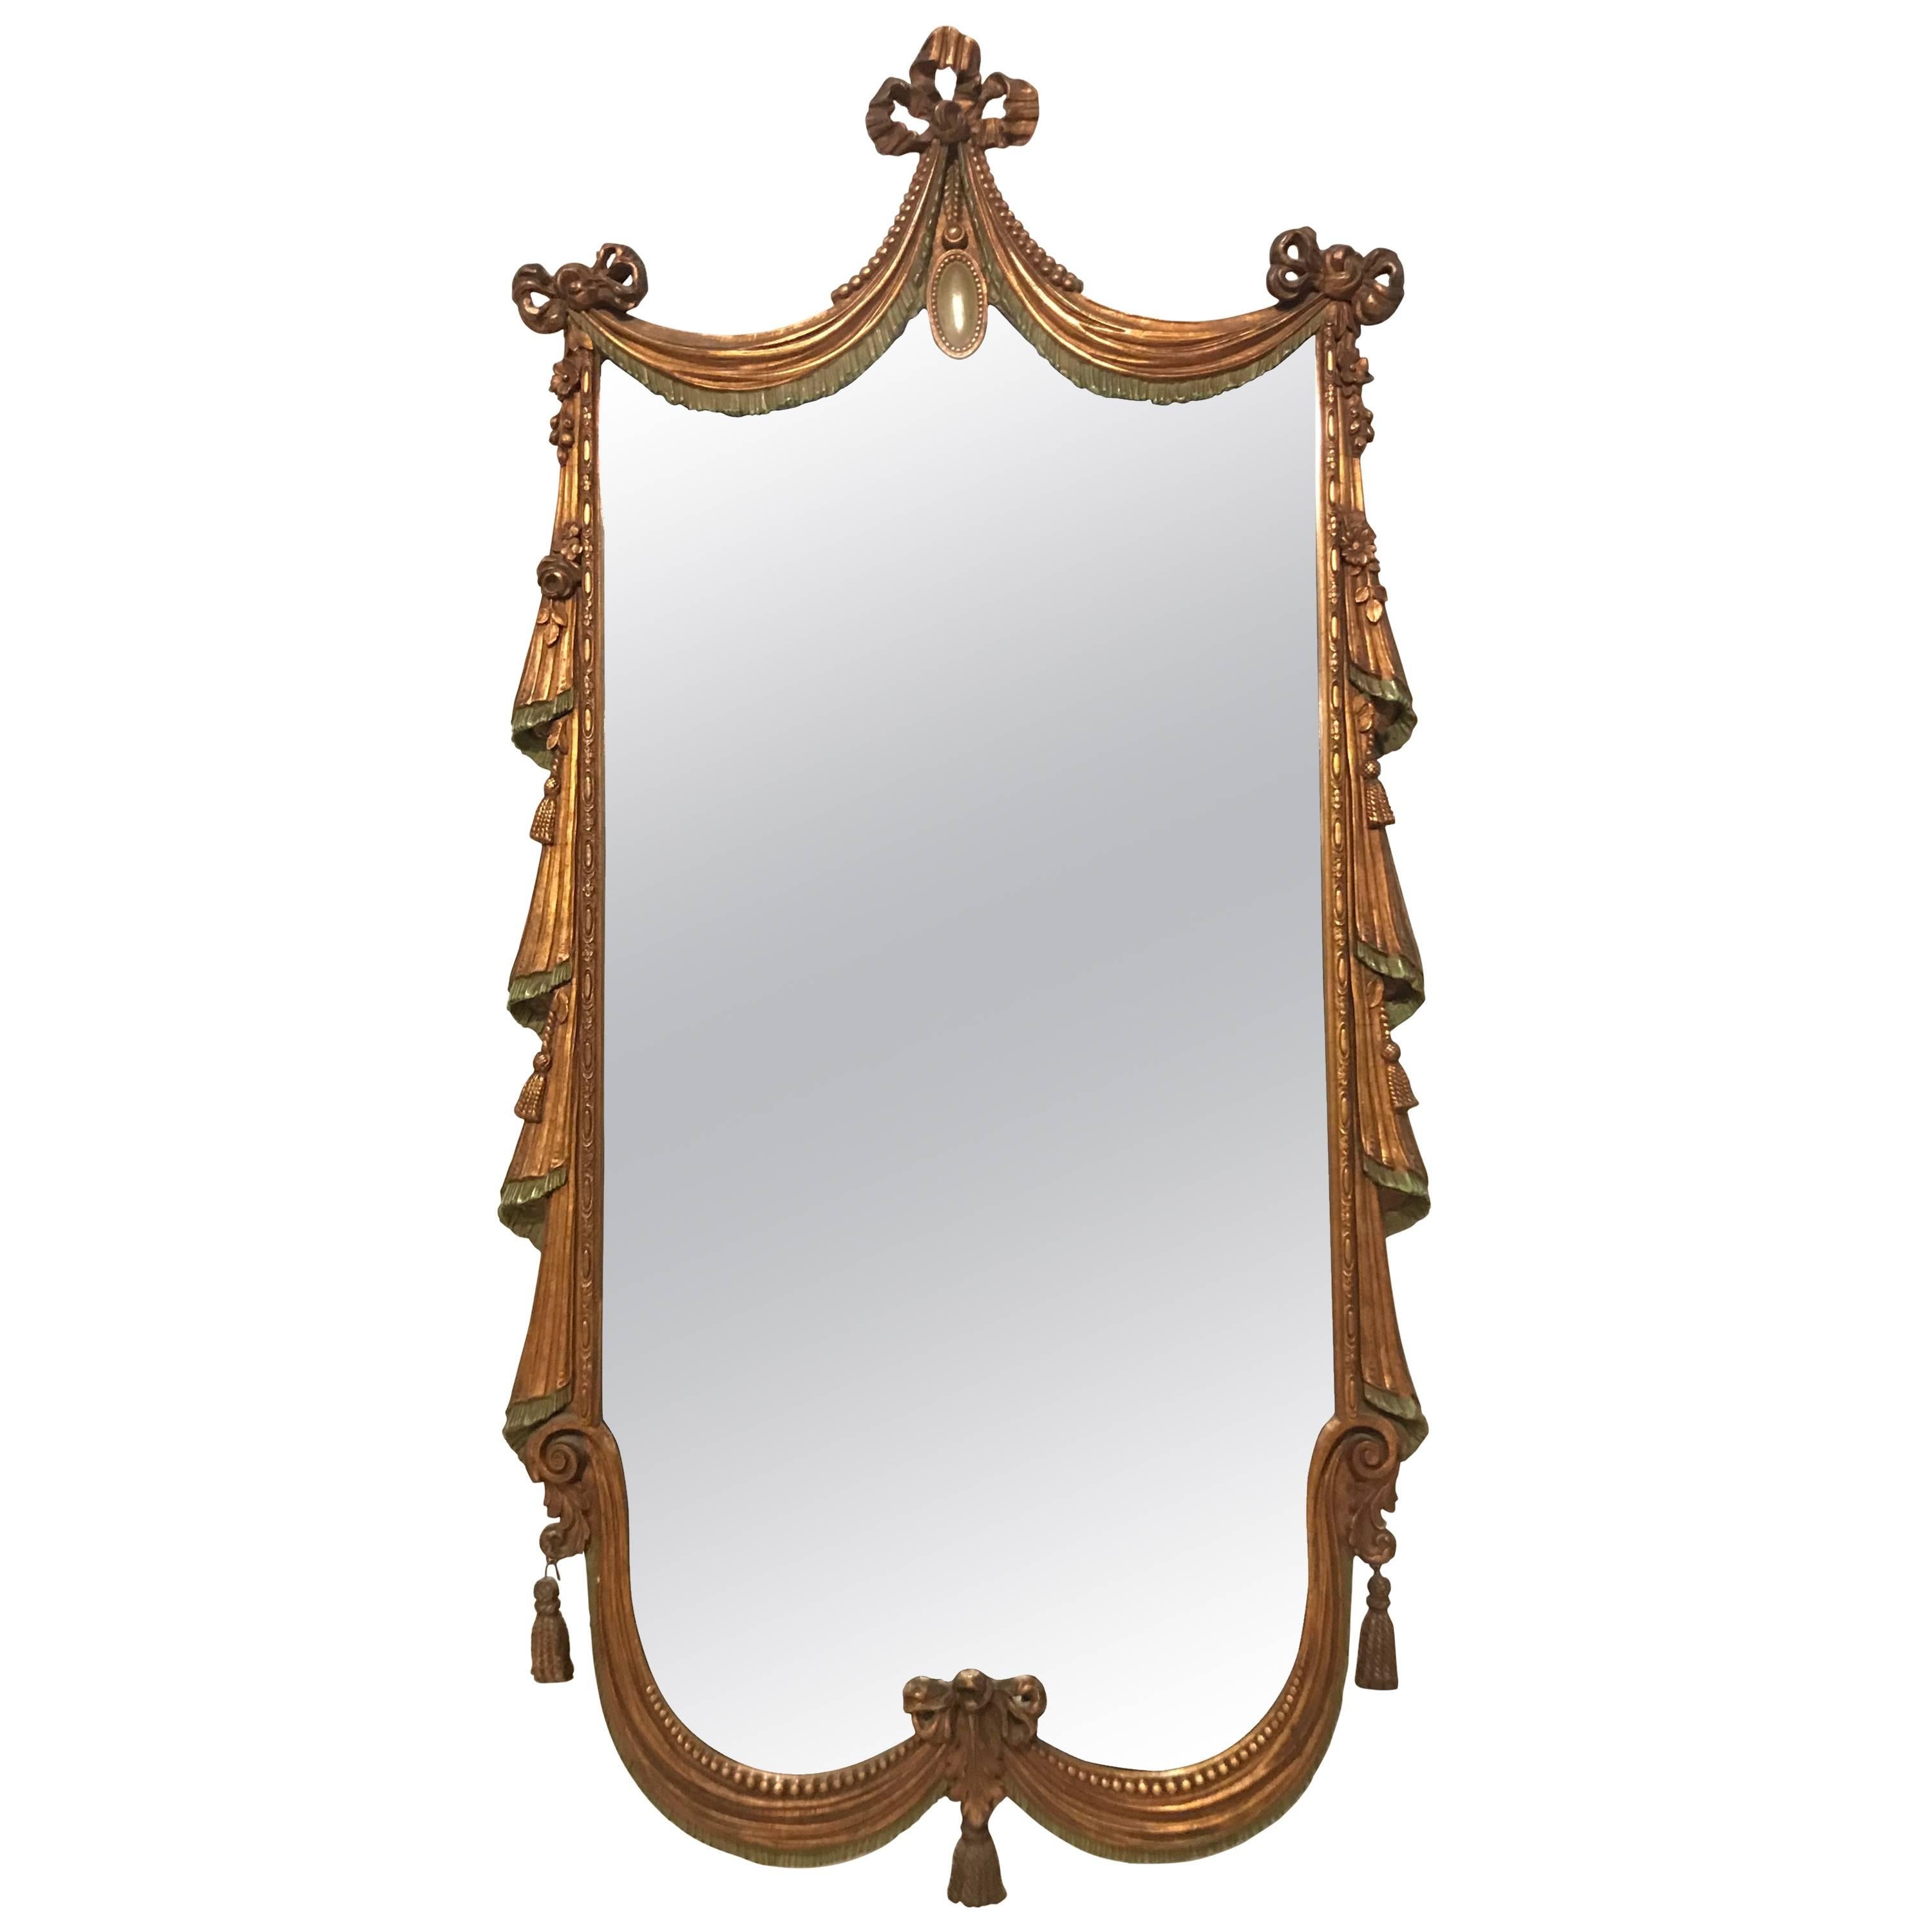 Drapery and Tassel Form Giltwood Wall or Console Mirror Style of Dorothy Draper